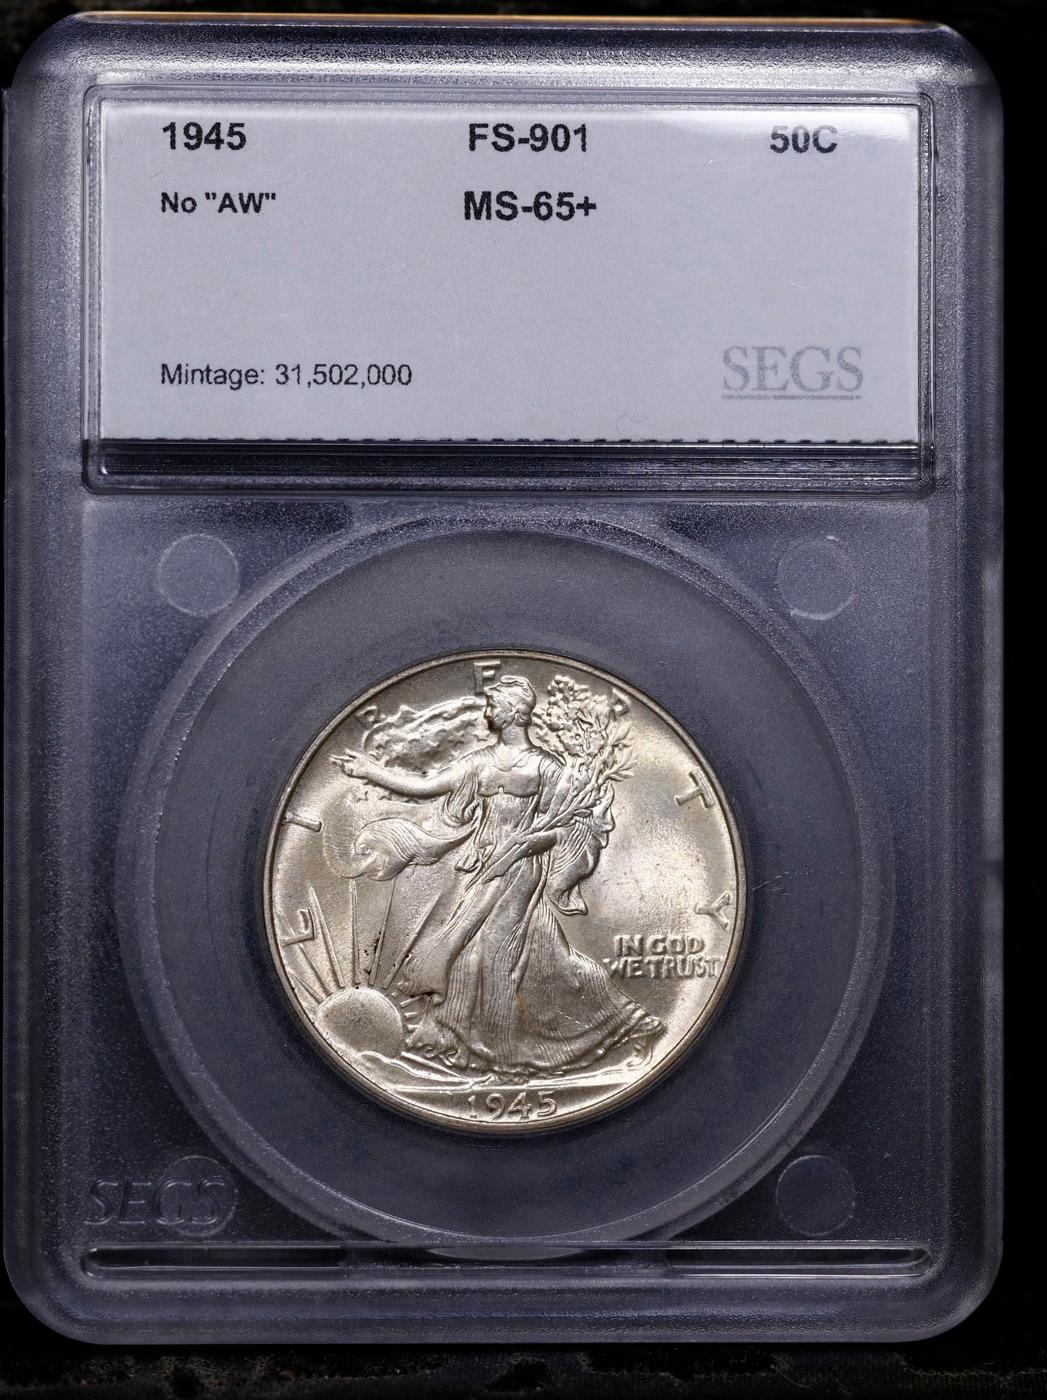 ***Auction Highlight*** 1945-p Walking Liberty Half Dollar FS-901 "No AW" 50c Graded ms65+ By SEGS (